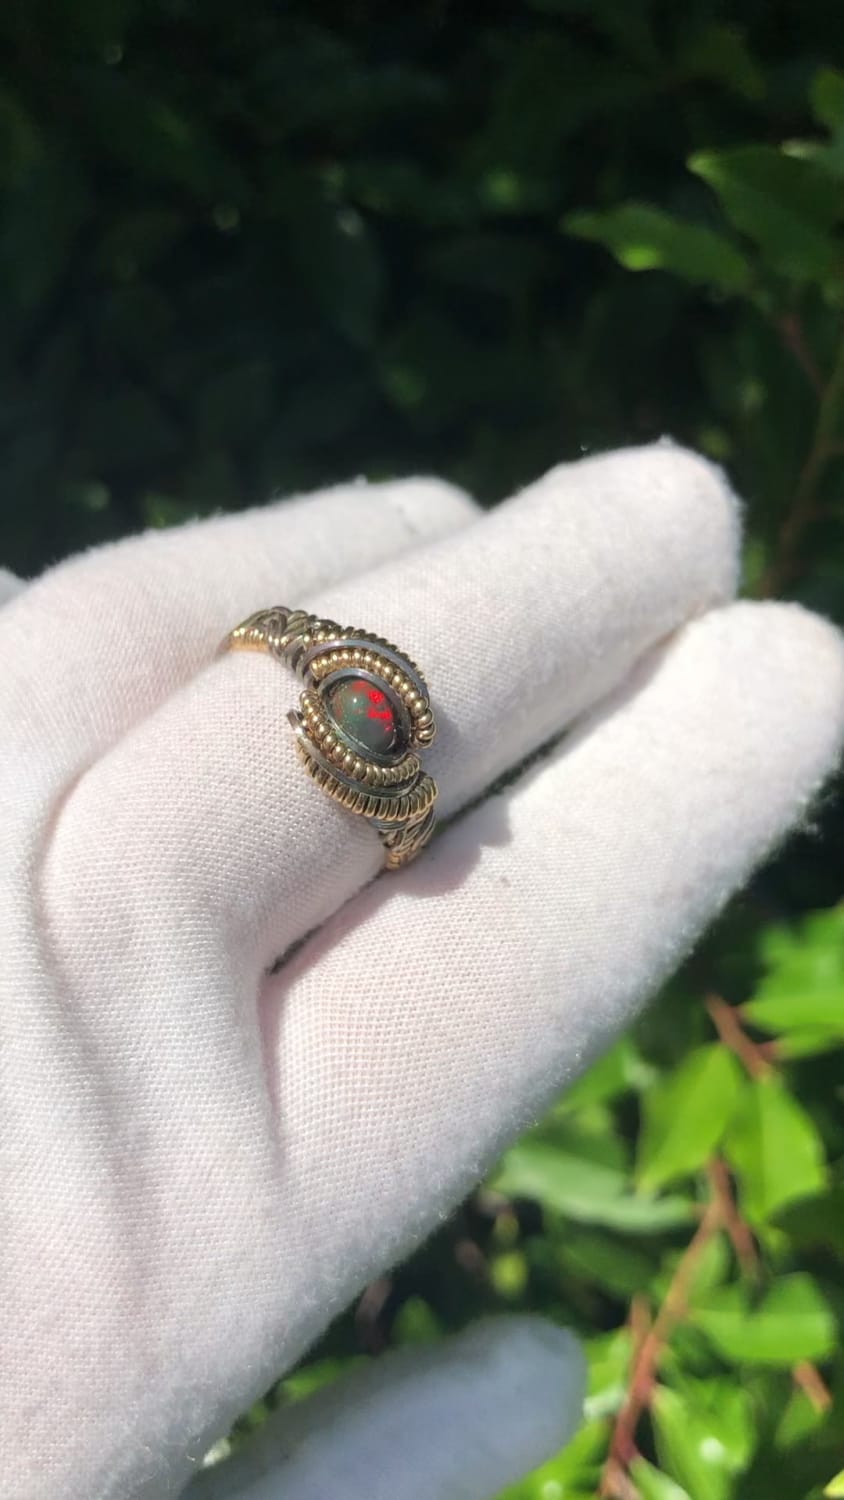 I wire wrapped this Opal ring using 14k gold filled wire with some oxidized sterling silver additions and some crystal surprises on the bottom band!